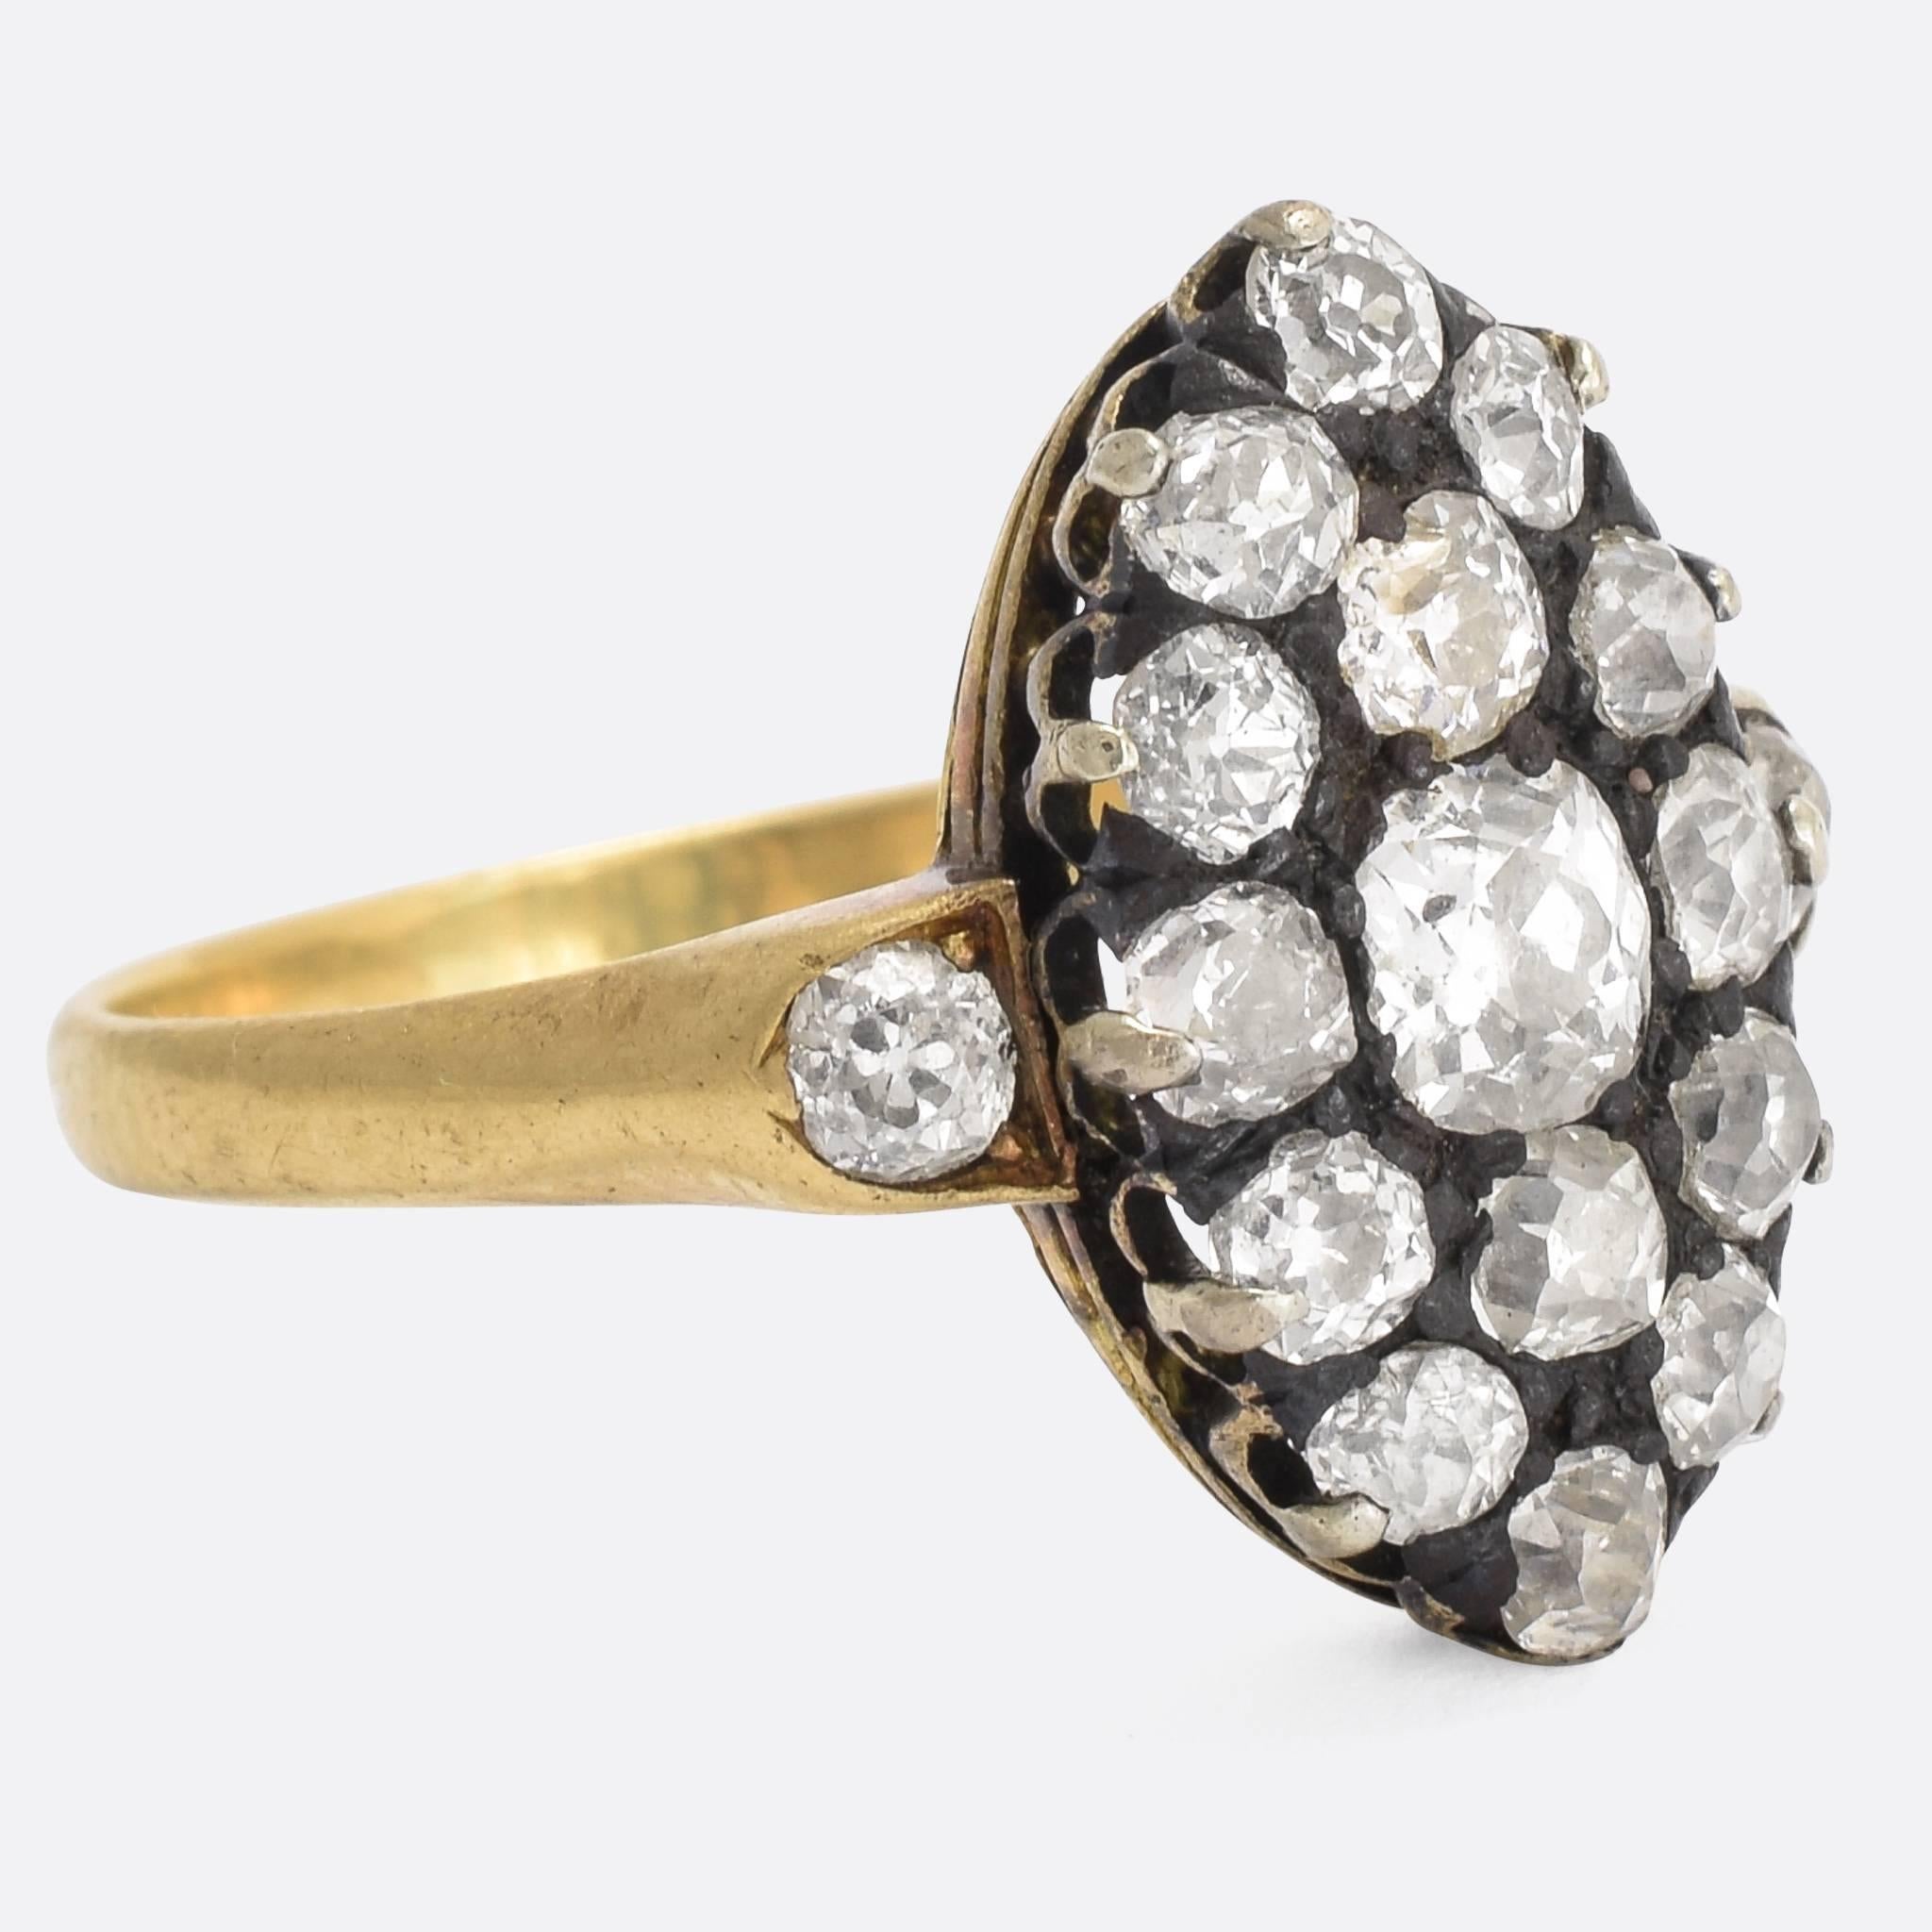 A splendid antique old cut diamond cluster ring, with marquise-shaped head and diamond shoulder accents. It dates to the Victorian era, c.1880, set with just over 2 carats of bright old mine cuts. The band is modelled in 18k yellow gold, and the